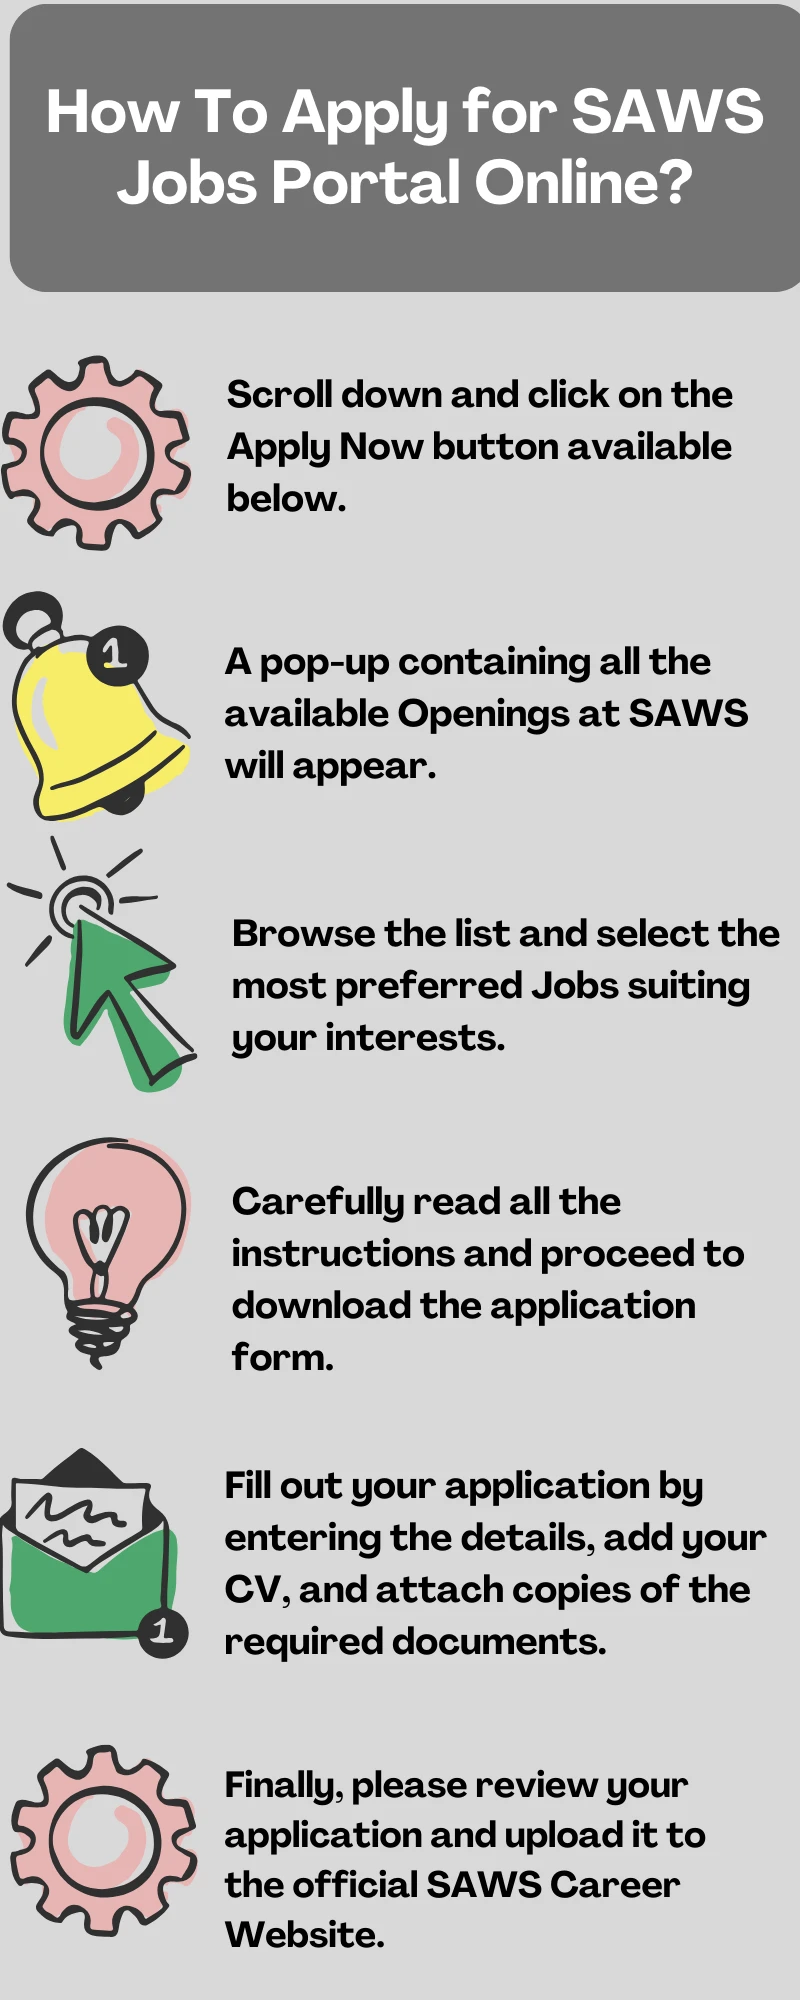 How To Apply for SAWS Jobs Portal Online?